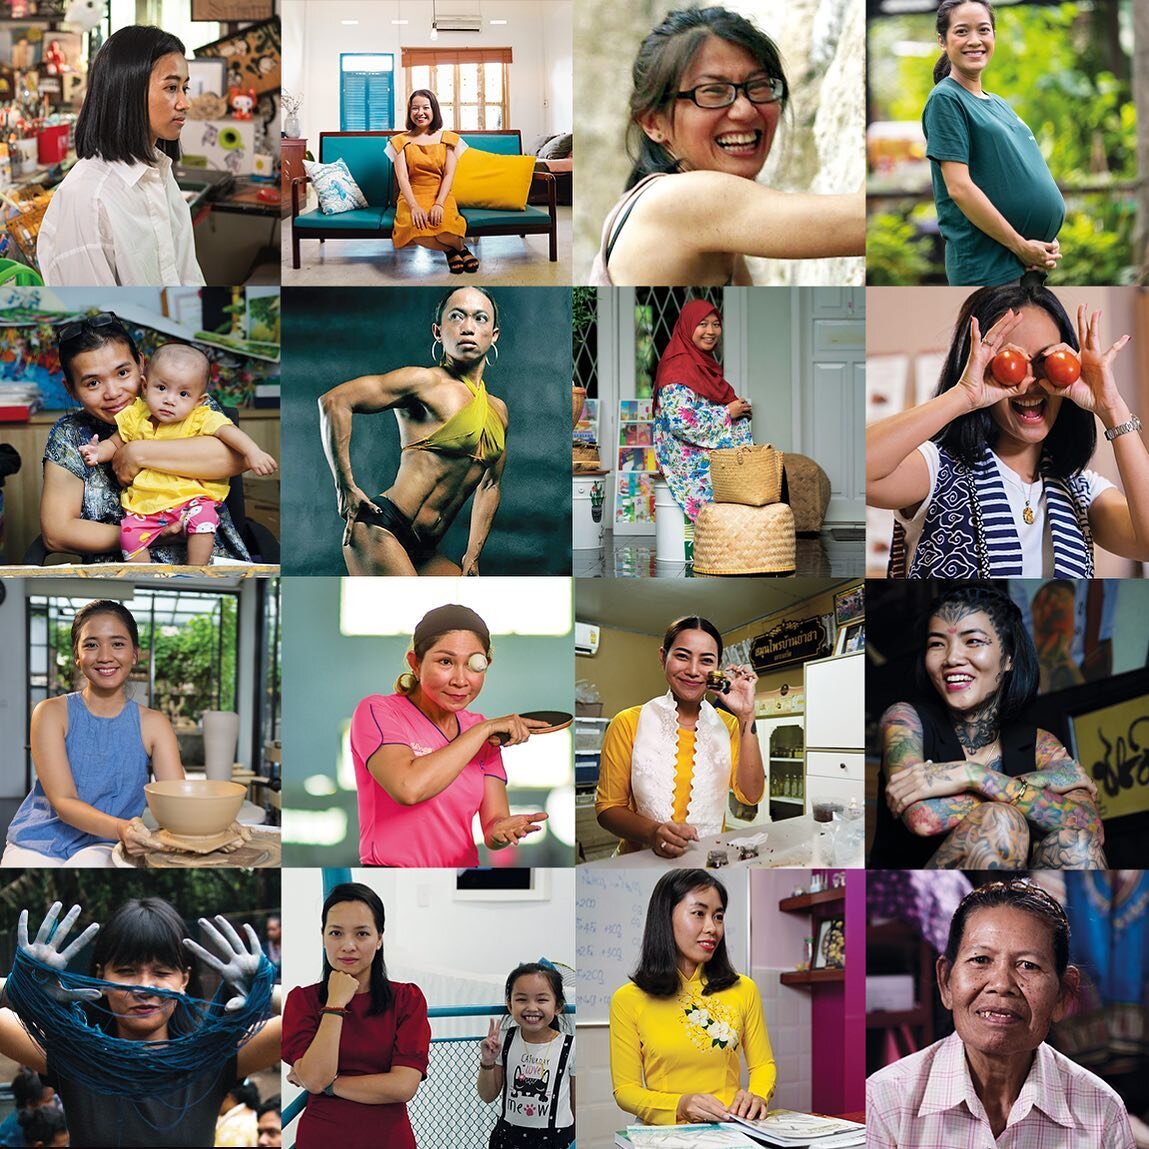 Over the past 4 years, Societal has worked with Unilever&rsquo;s Sunlight on its brand purpose. It's been an amazing project, using the power of the brand to create social good by celebrating and encouraging female empowerment in Asia.

We&rsquo;ve u